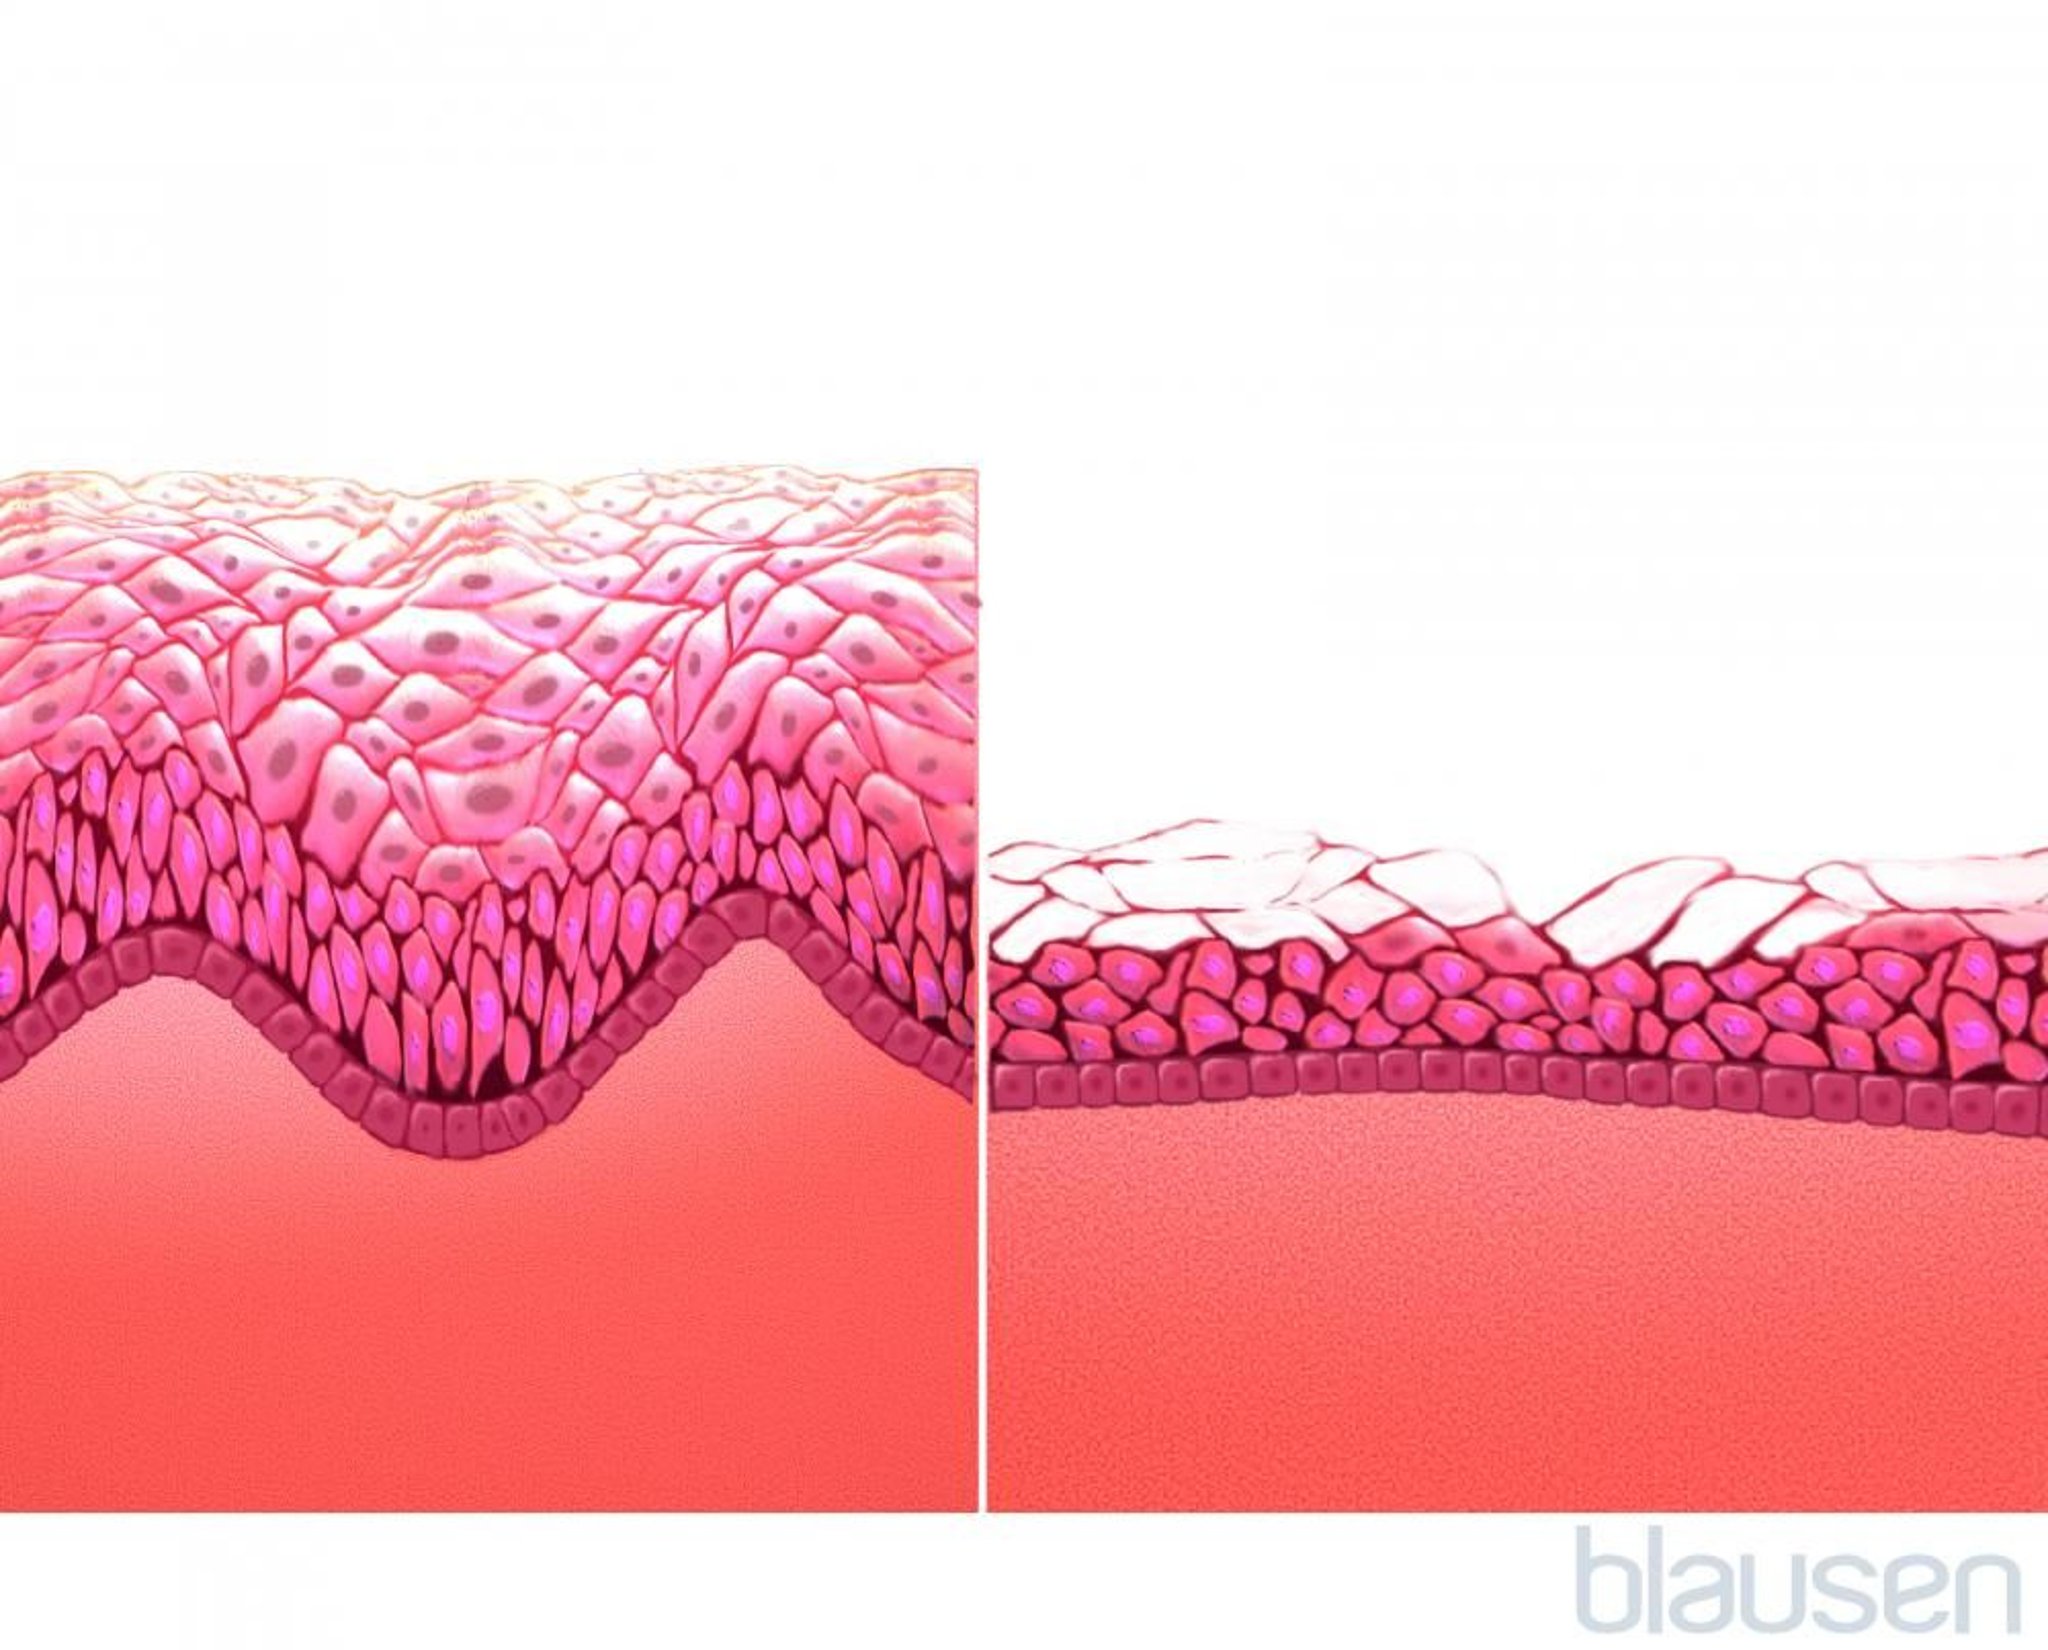 Vaginal Mucosa (Before and After Menopause)